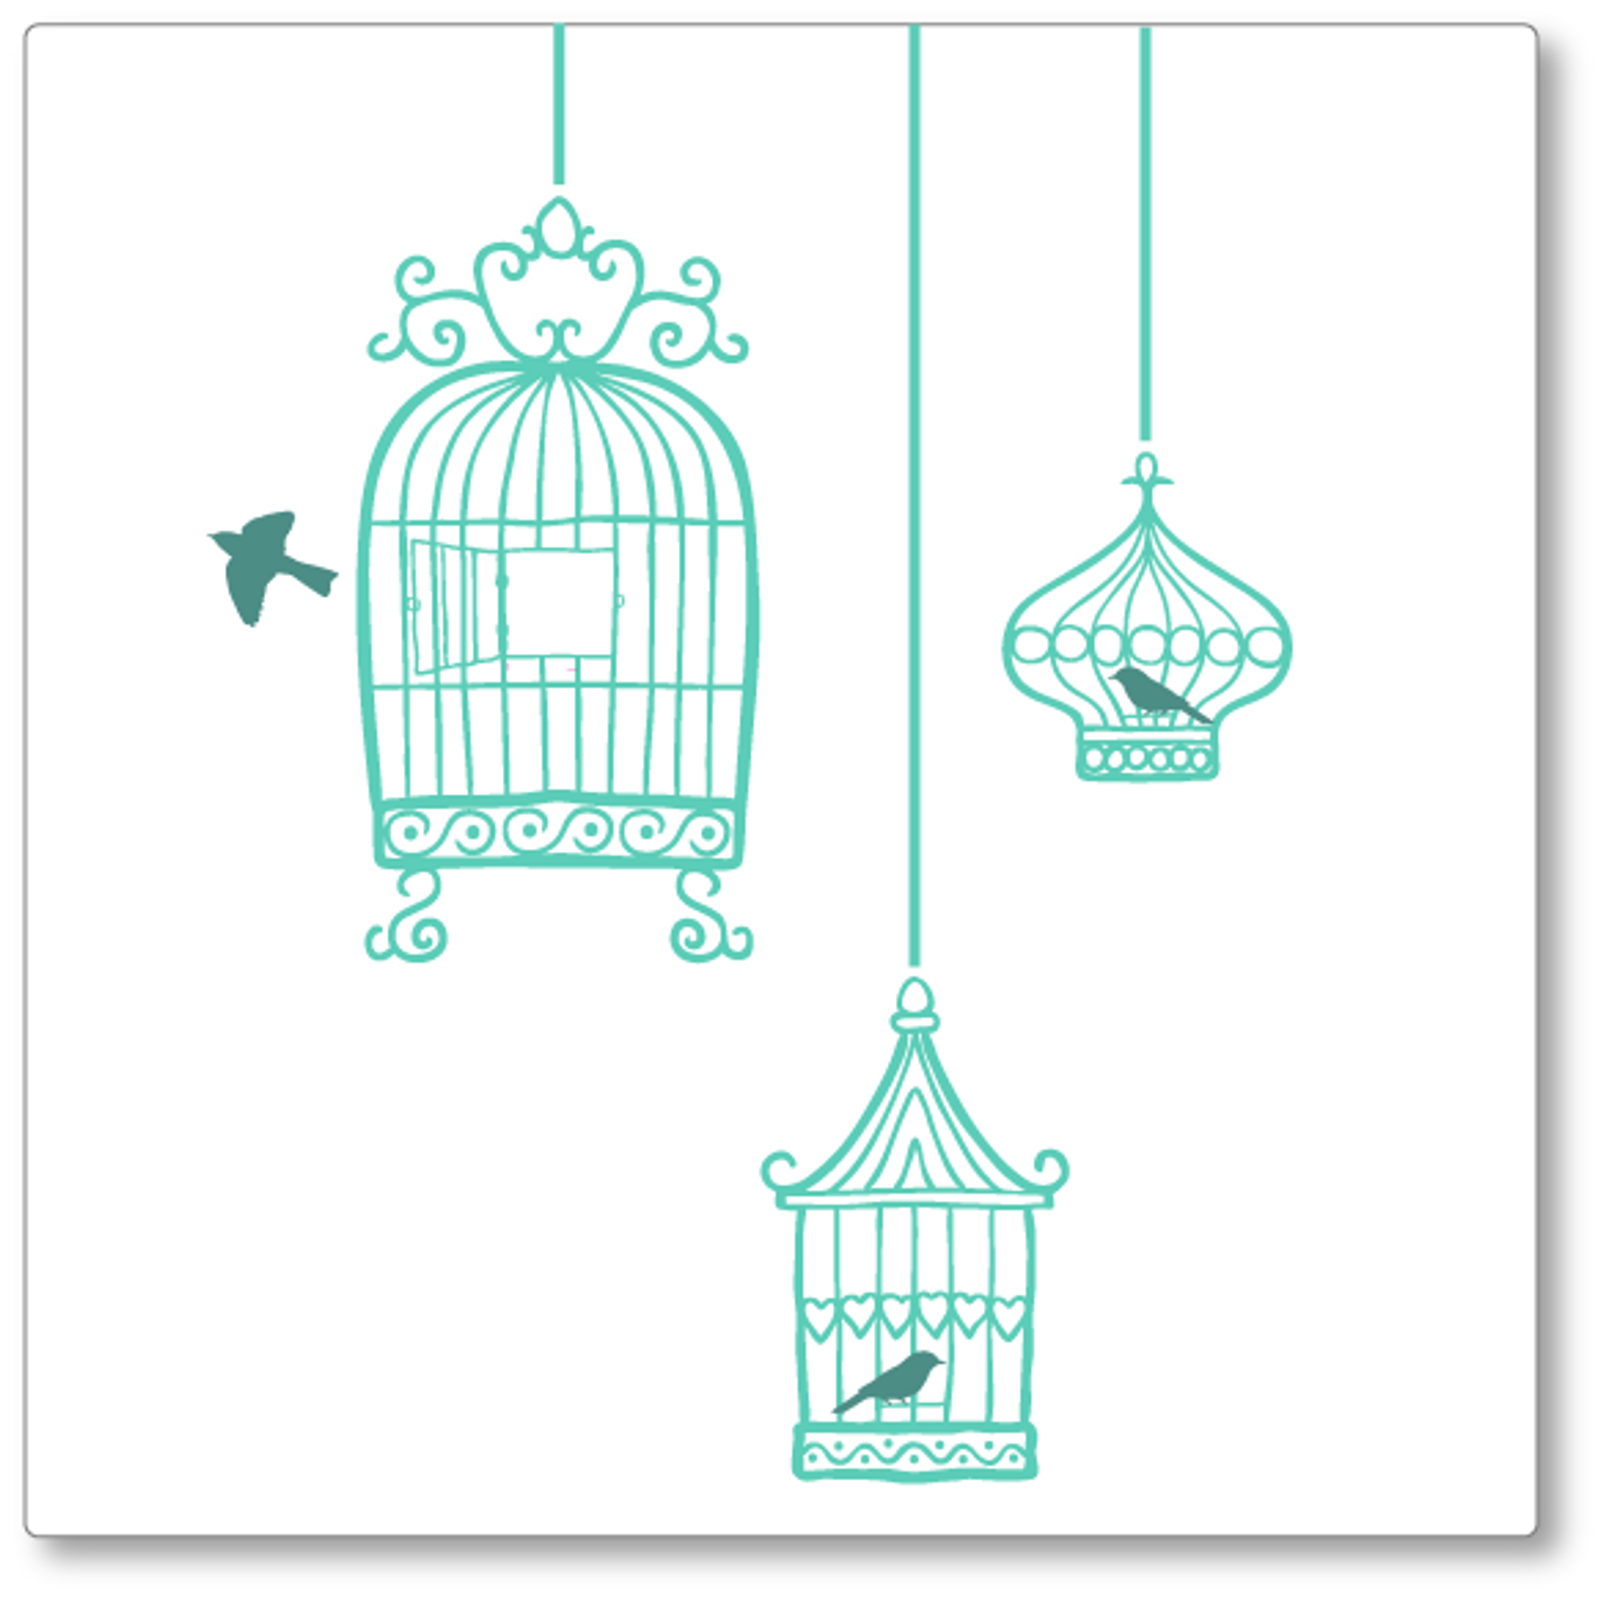 Our quirky set of 3 hanging birdcages was adapted from a hand drawn image. It adds flair to any wall. Shown here green, teal birds.